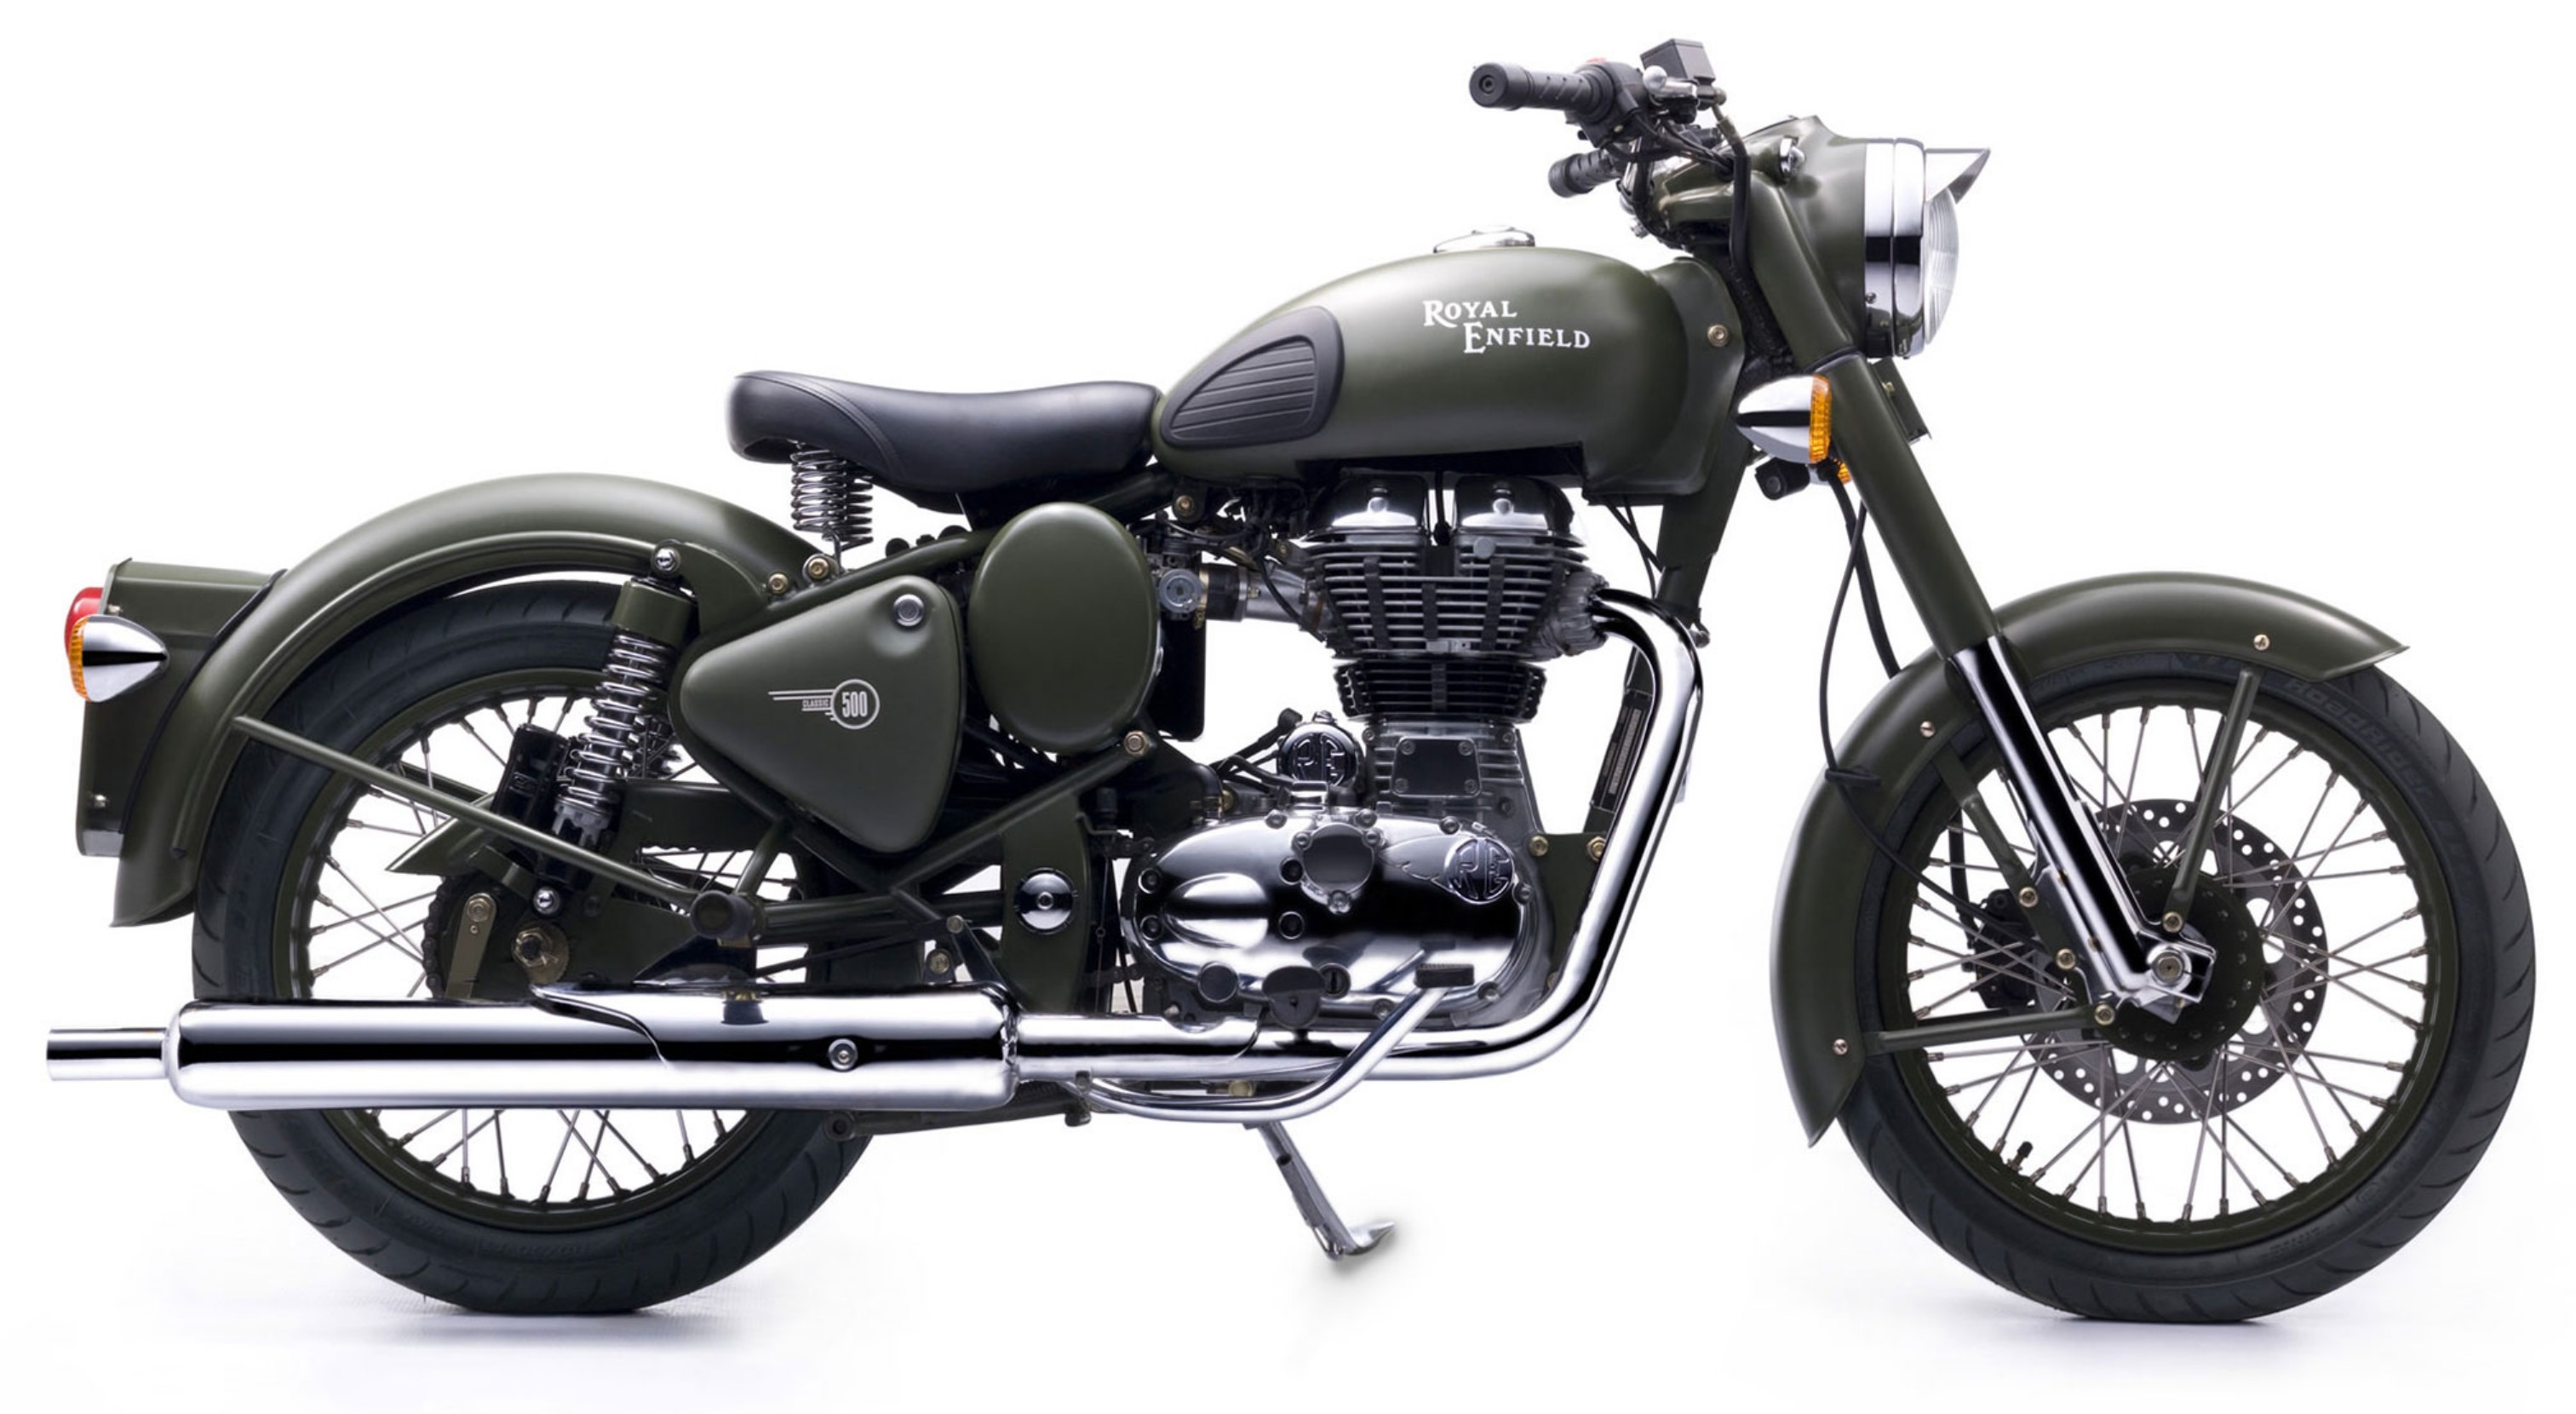 2017 Royal Enfield Classic Battle Green Picture Hd - Royal Enfield Green Battle - HD Wallpaper 